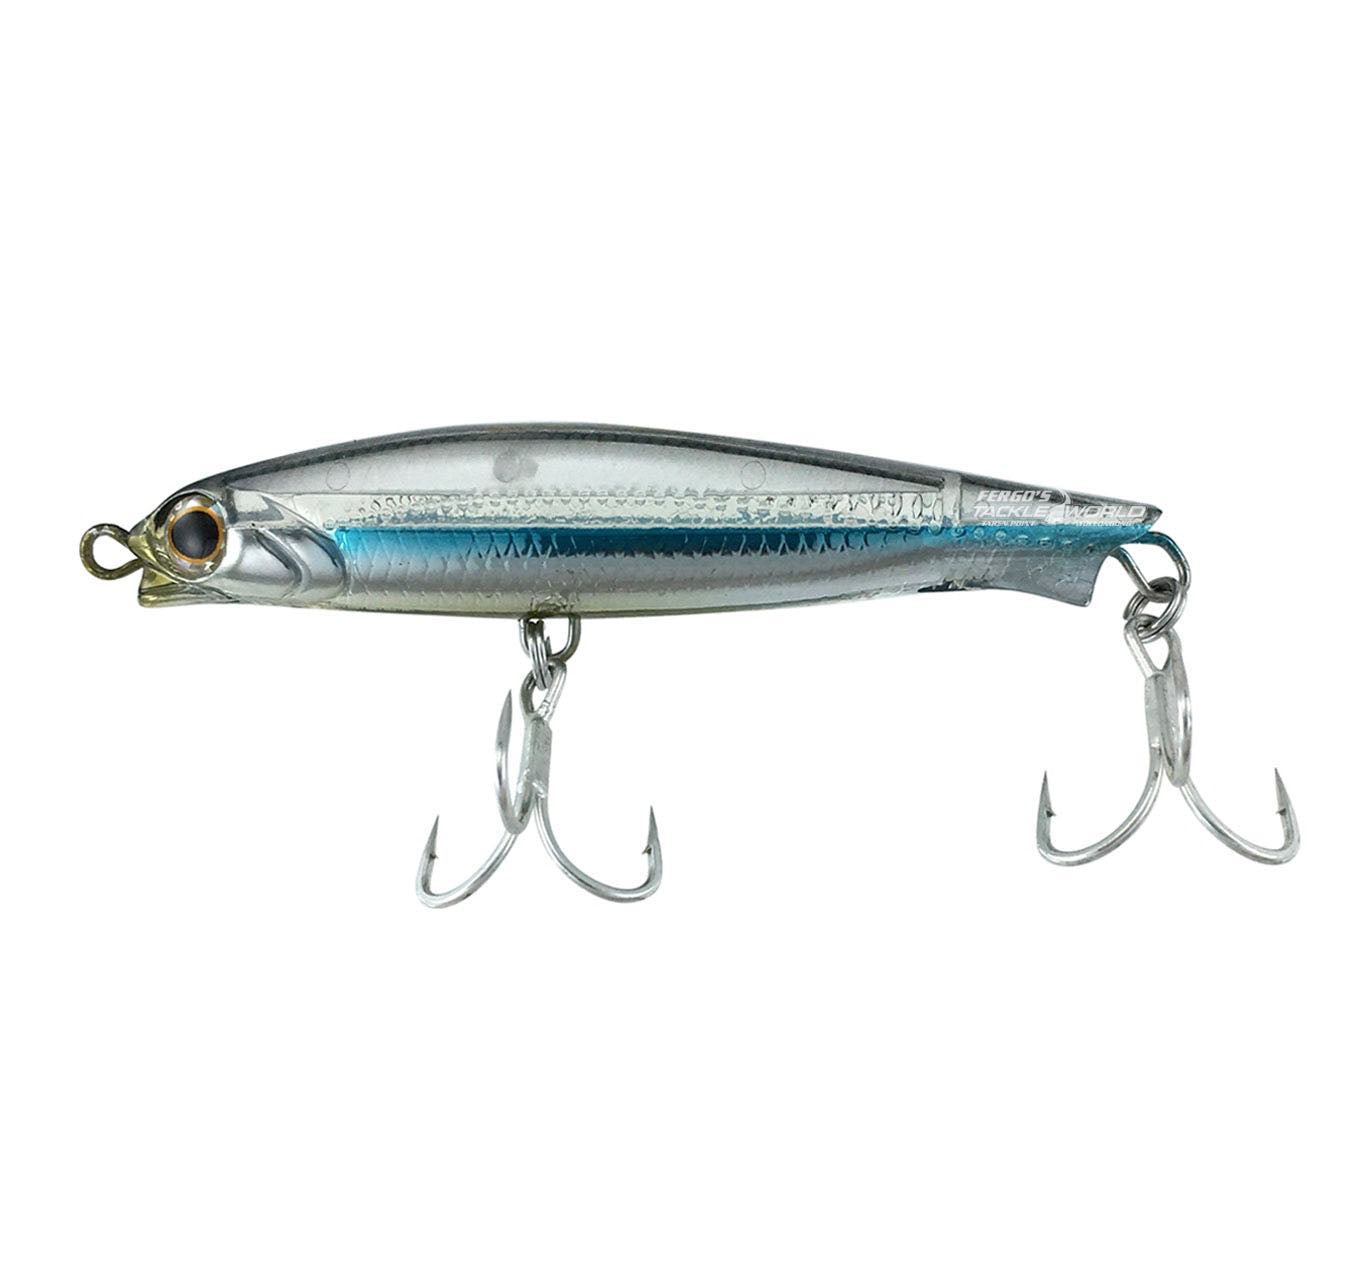 Le Squid Casting- Trolling Lure, 140mm 40g